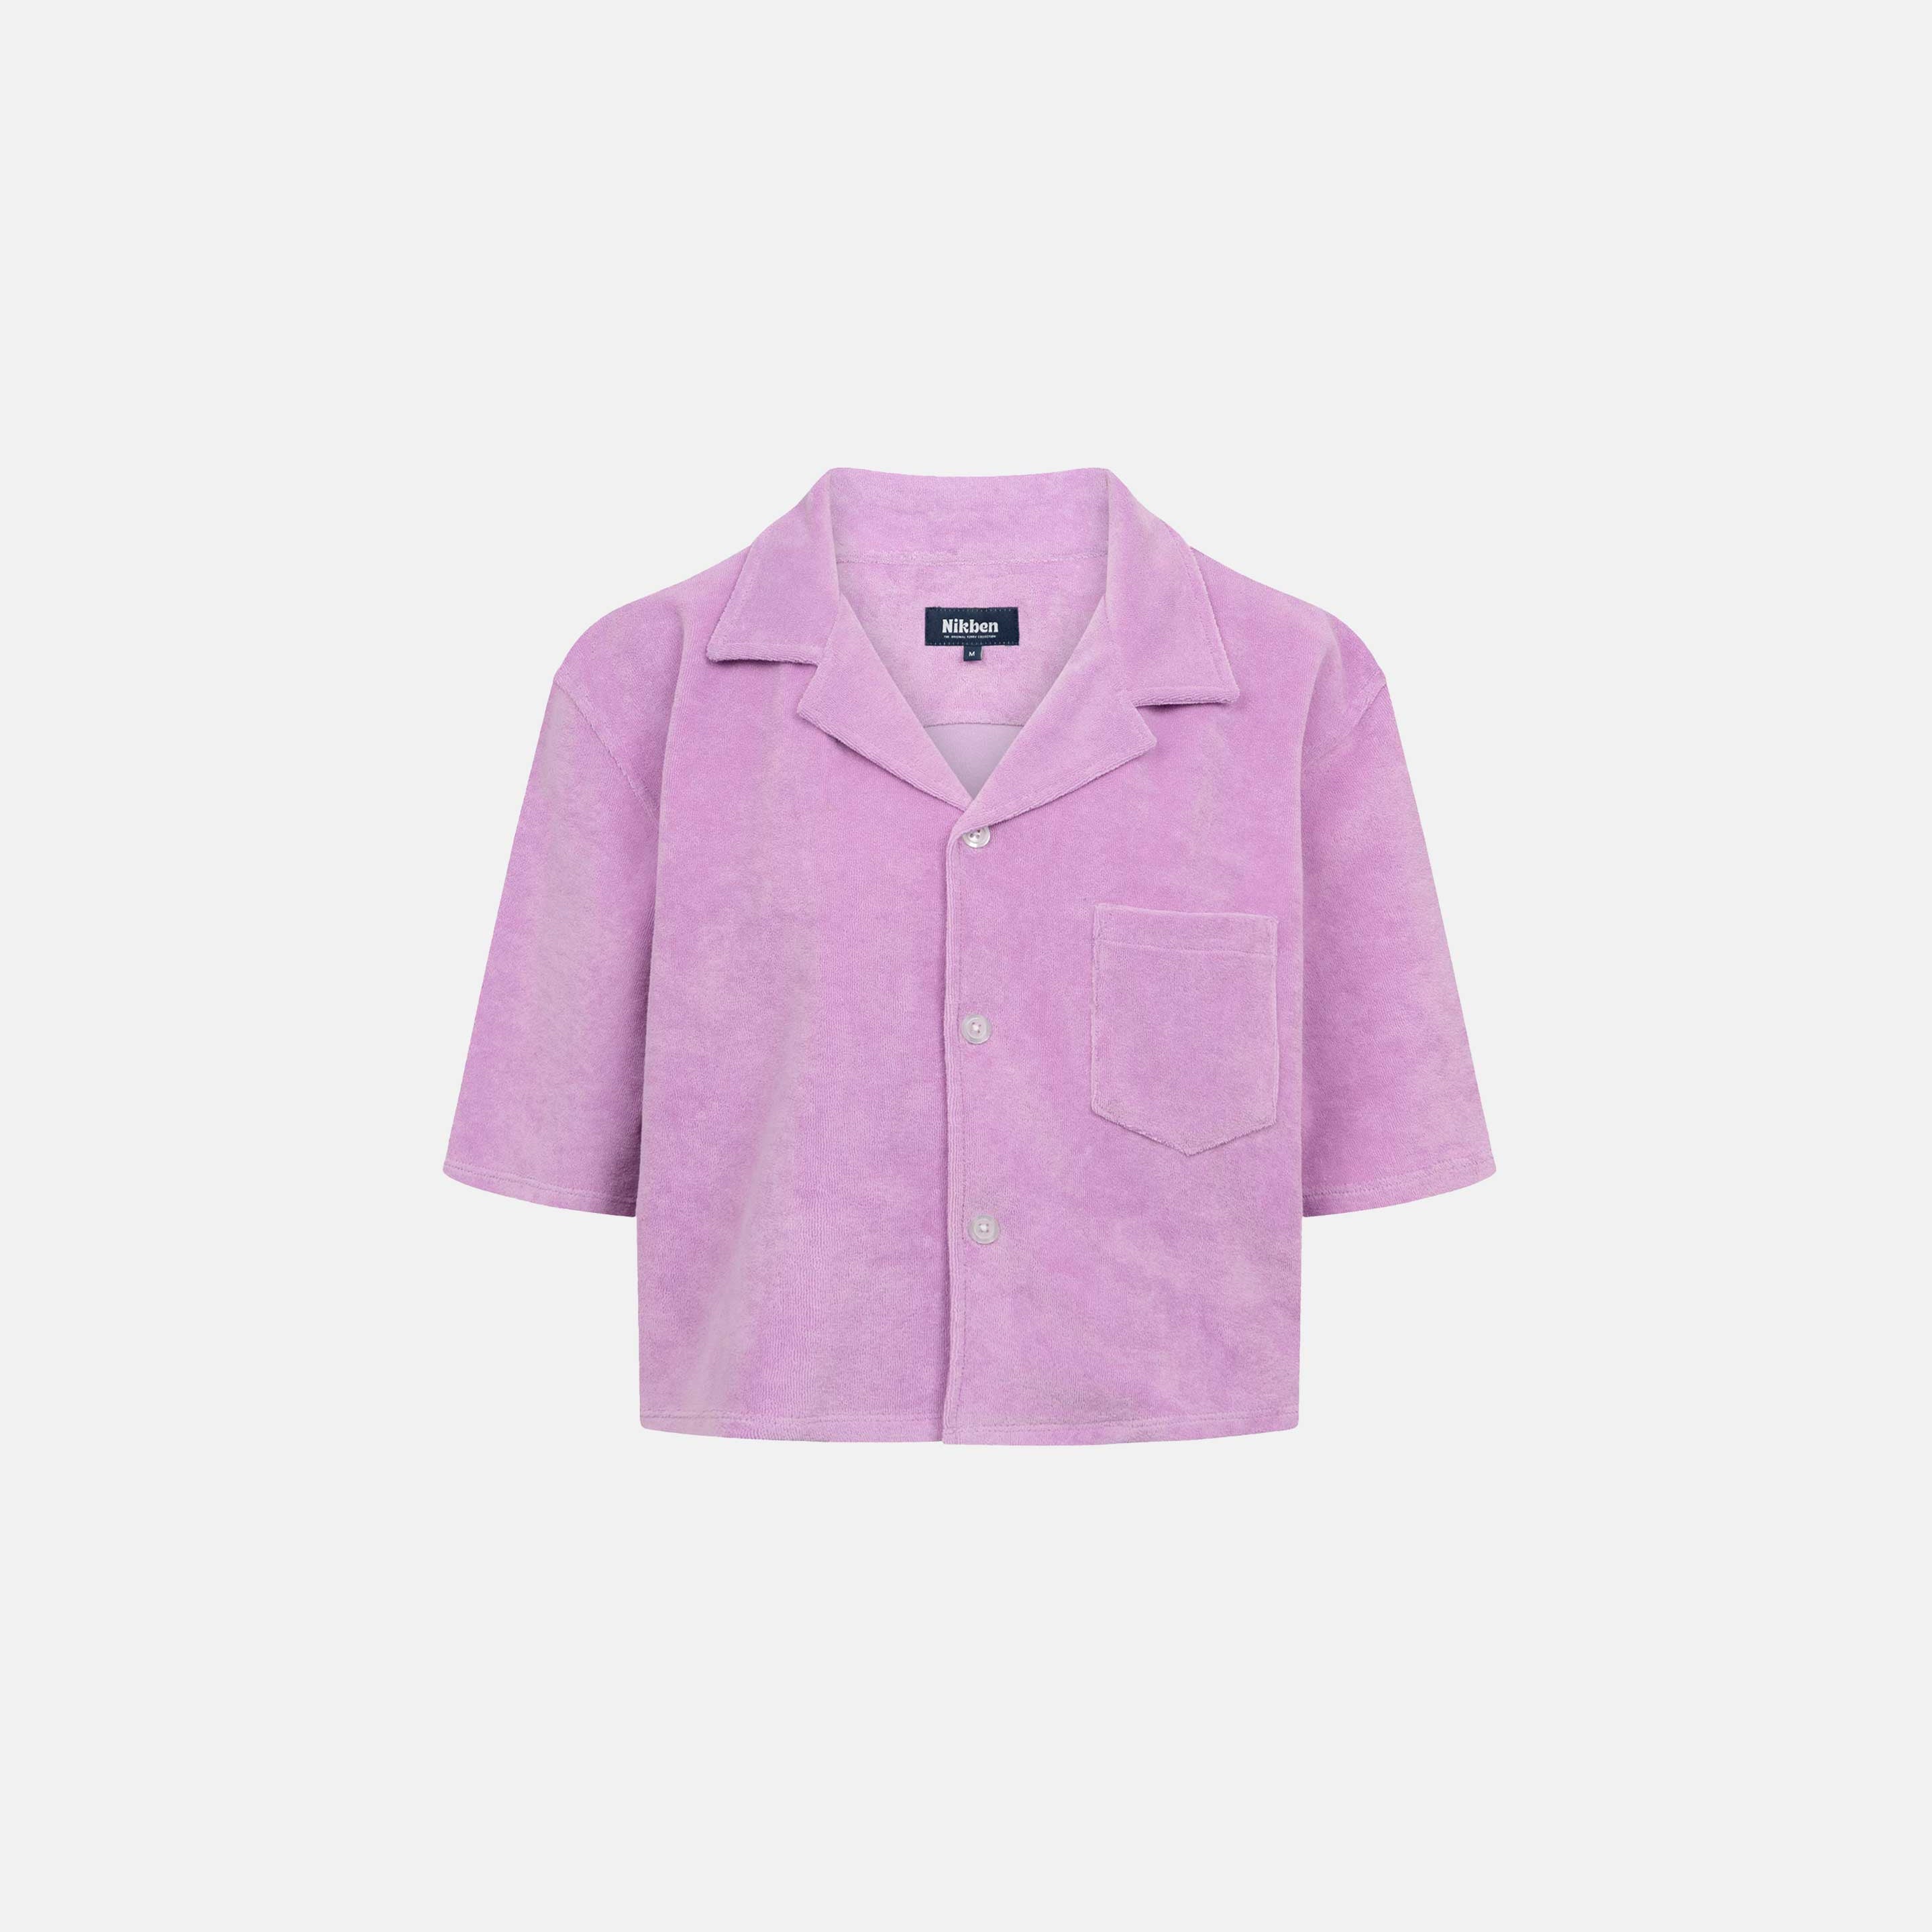 Purple, short sleeve, cropped shirt with white button closure and one chest pocket